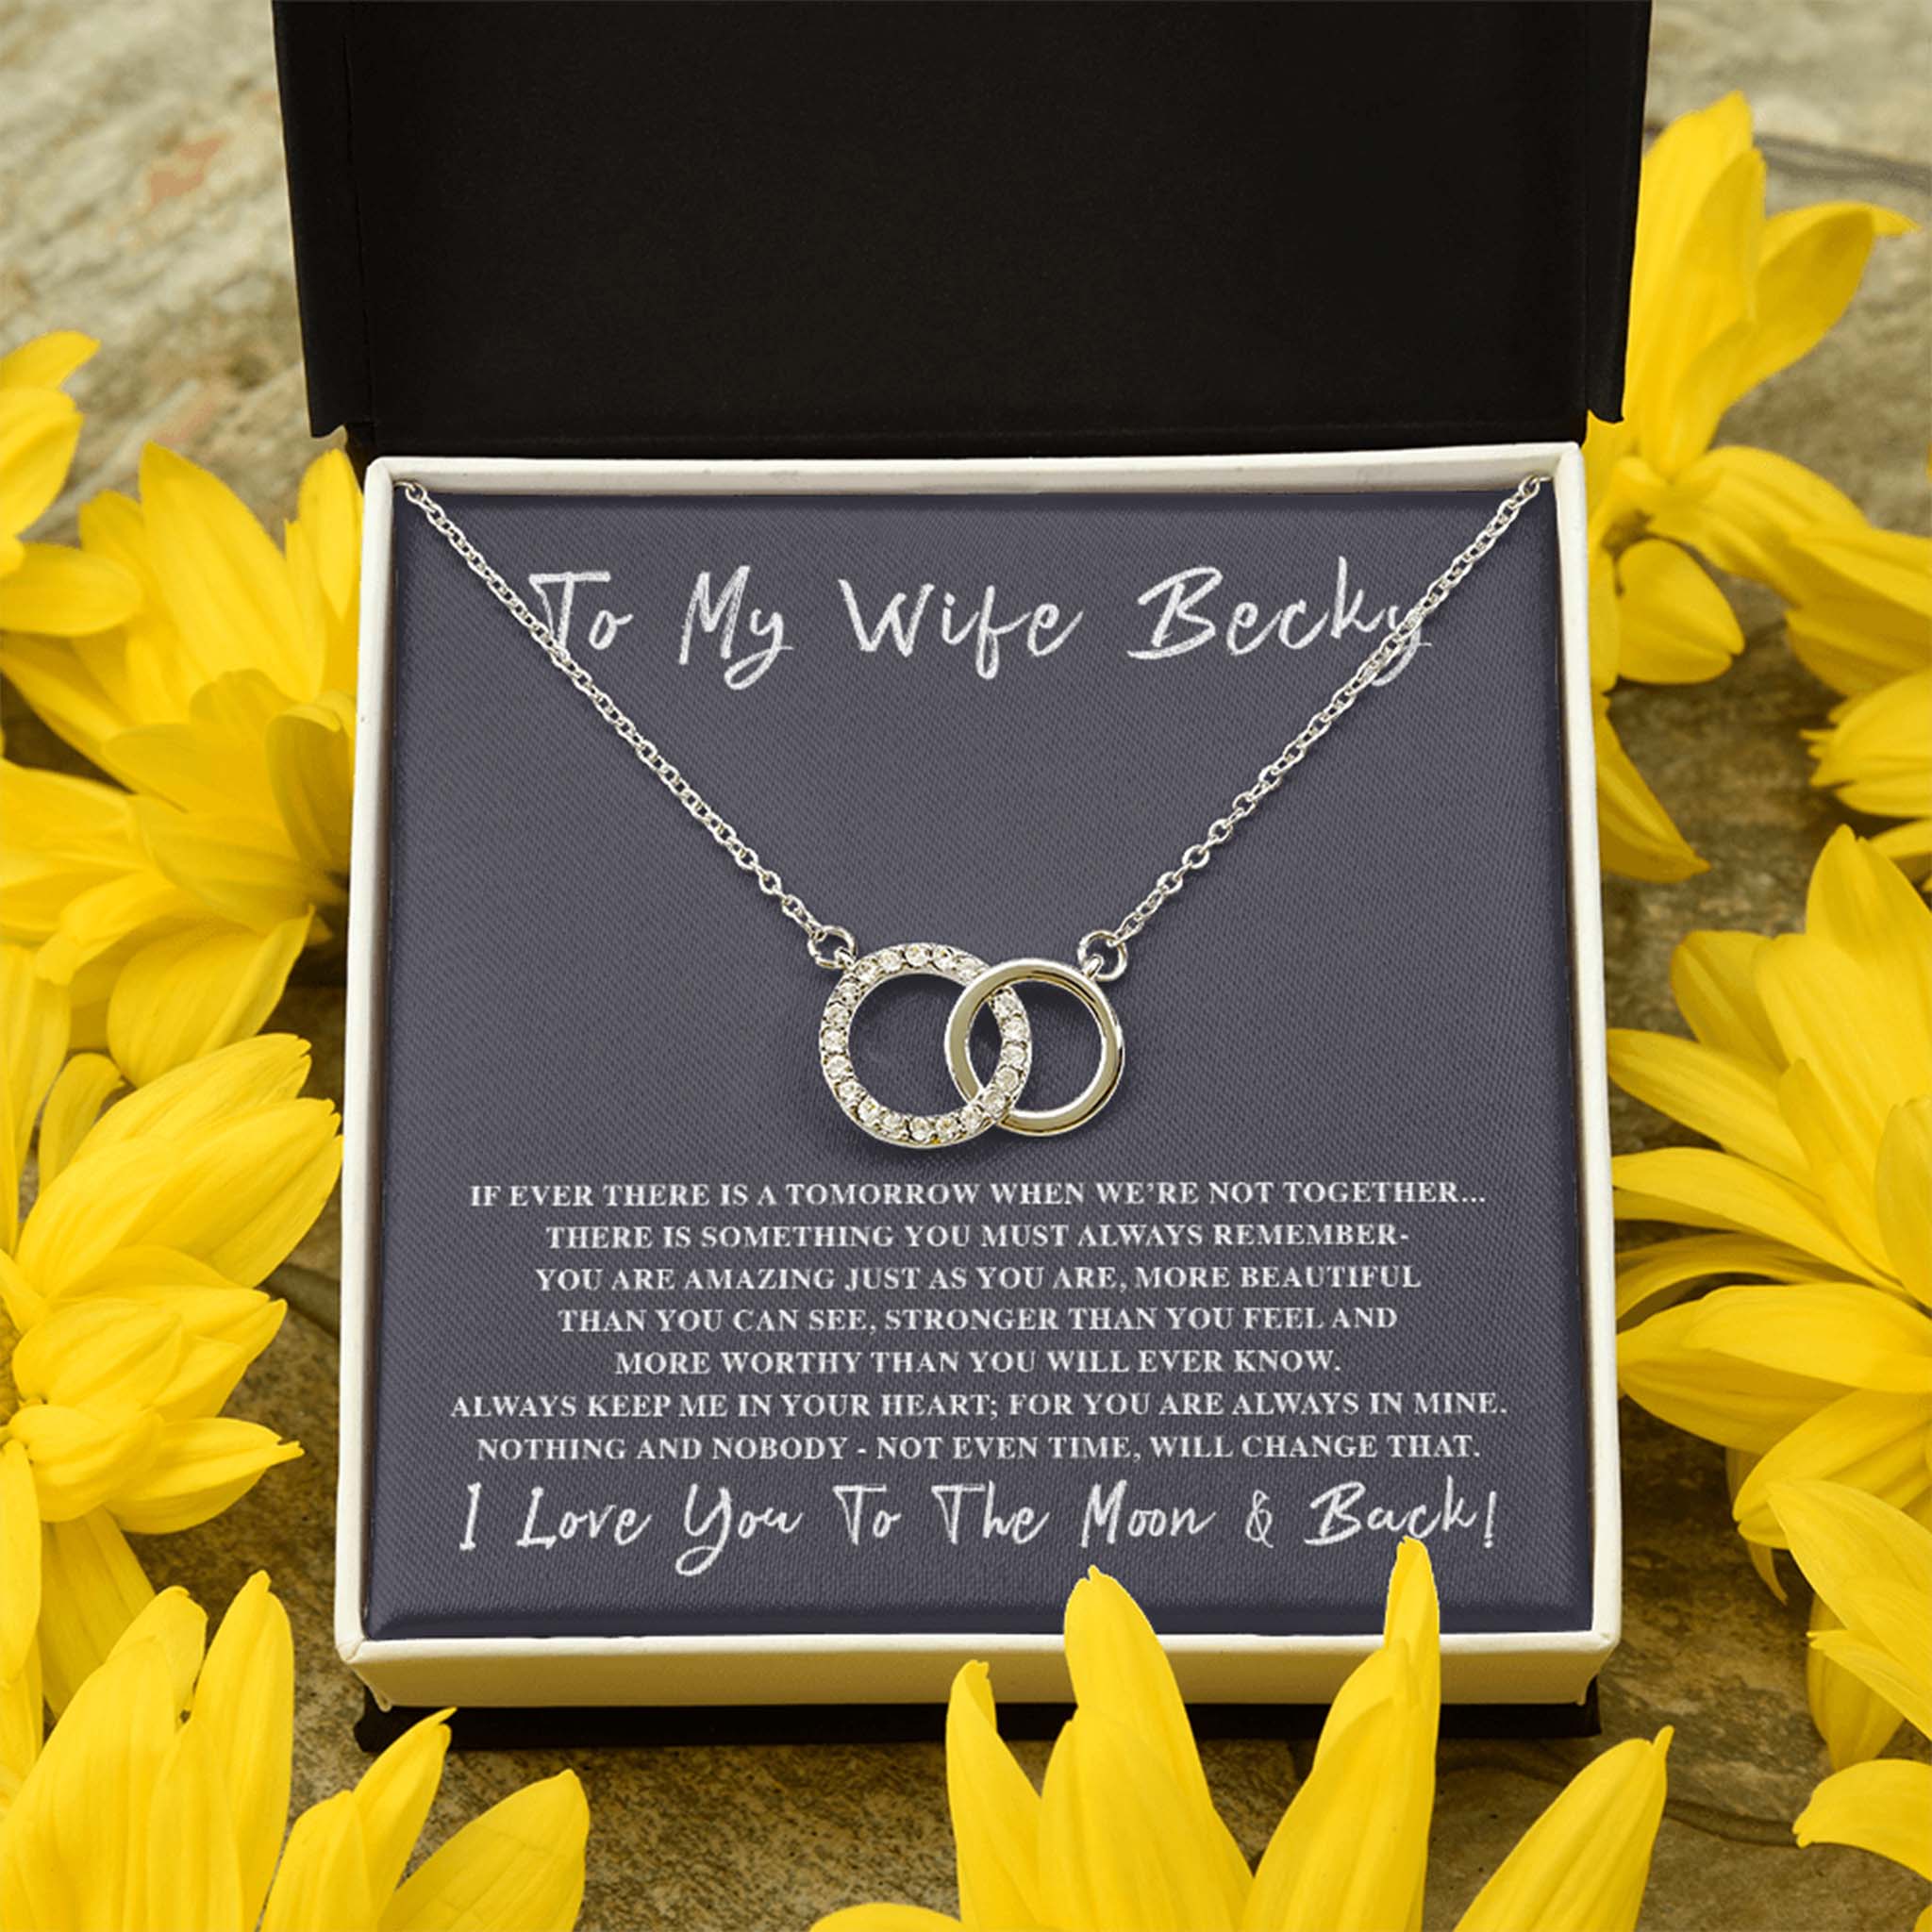 Perfect Pair Necklace If Ever There Is a Tomorrow -Love Personalized Insert CardCustomly Gifts